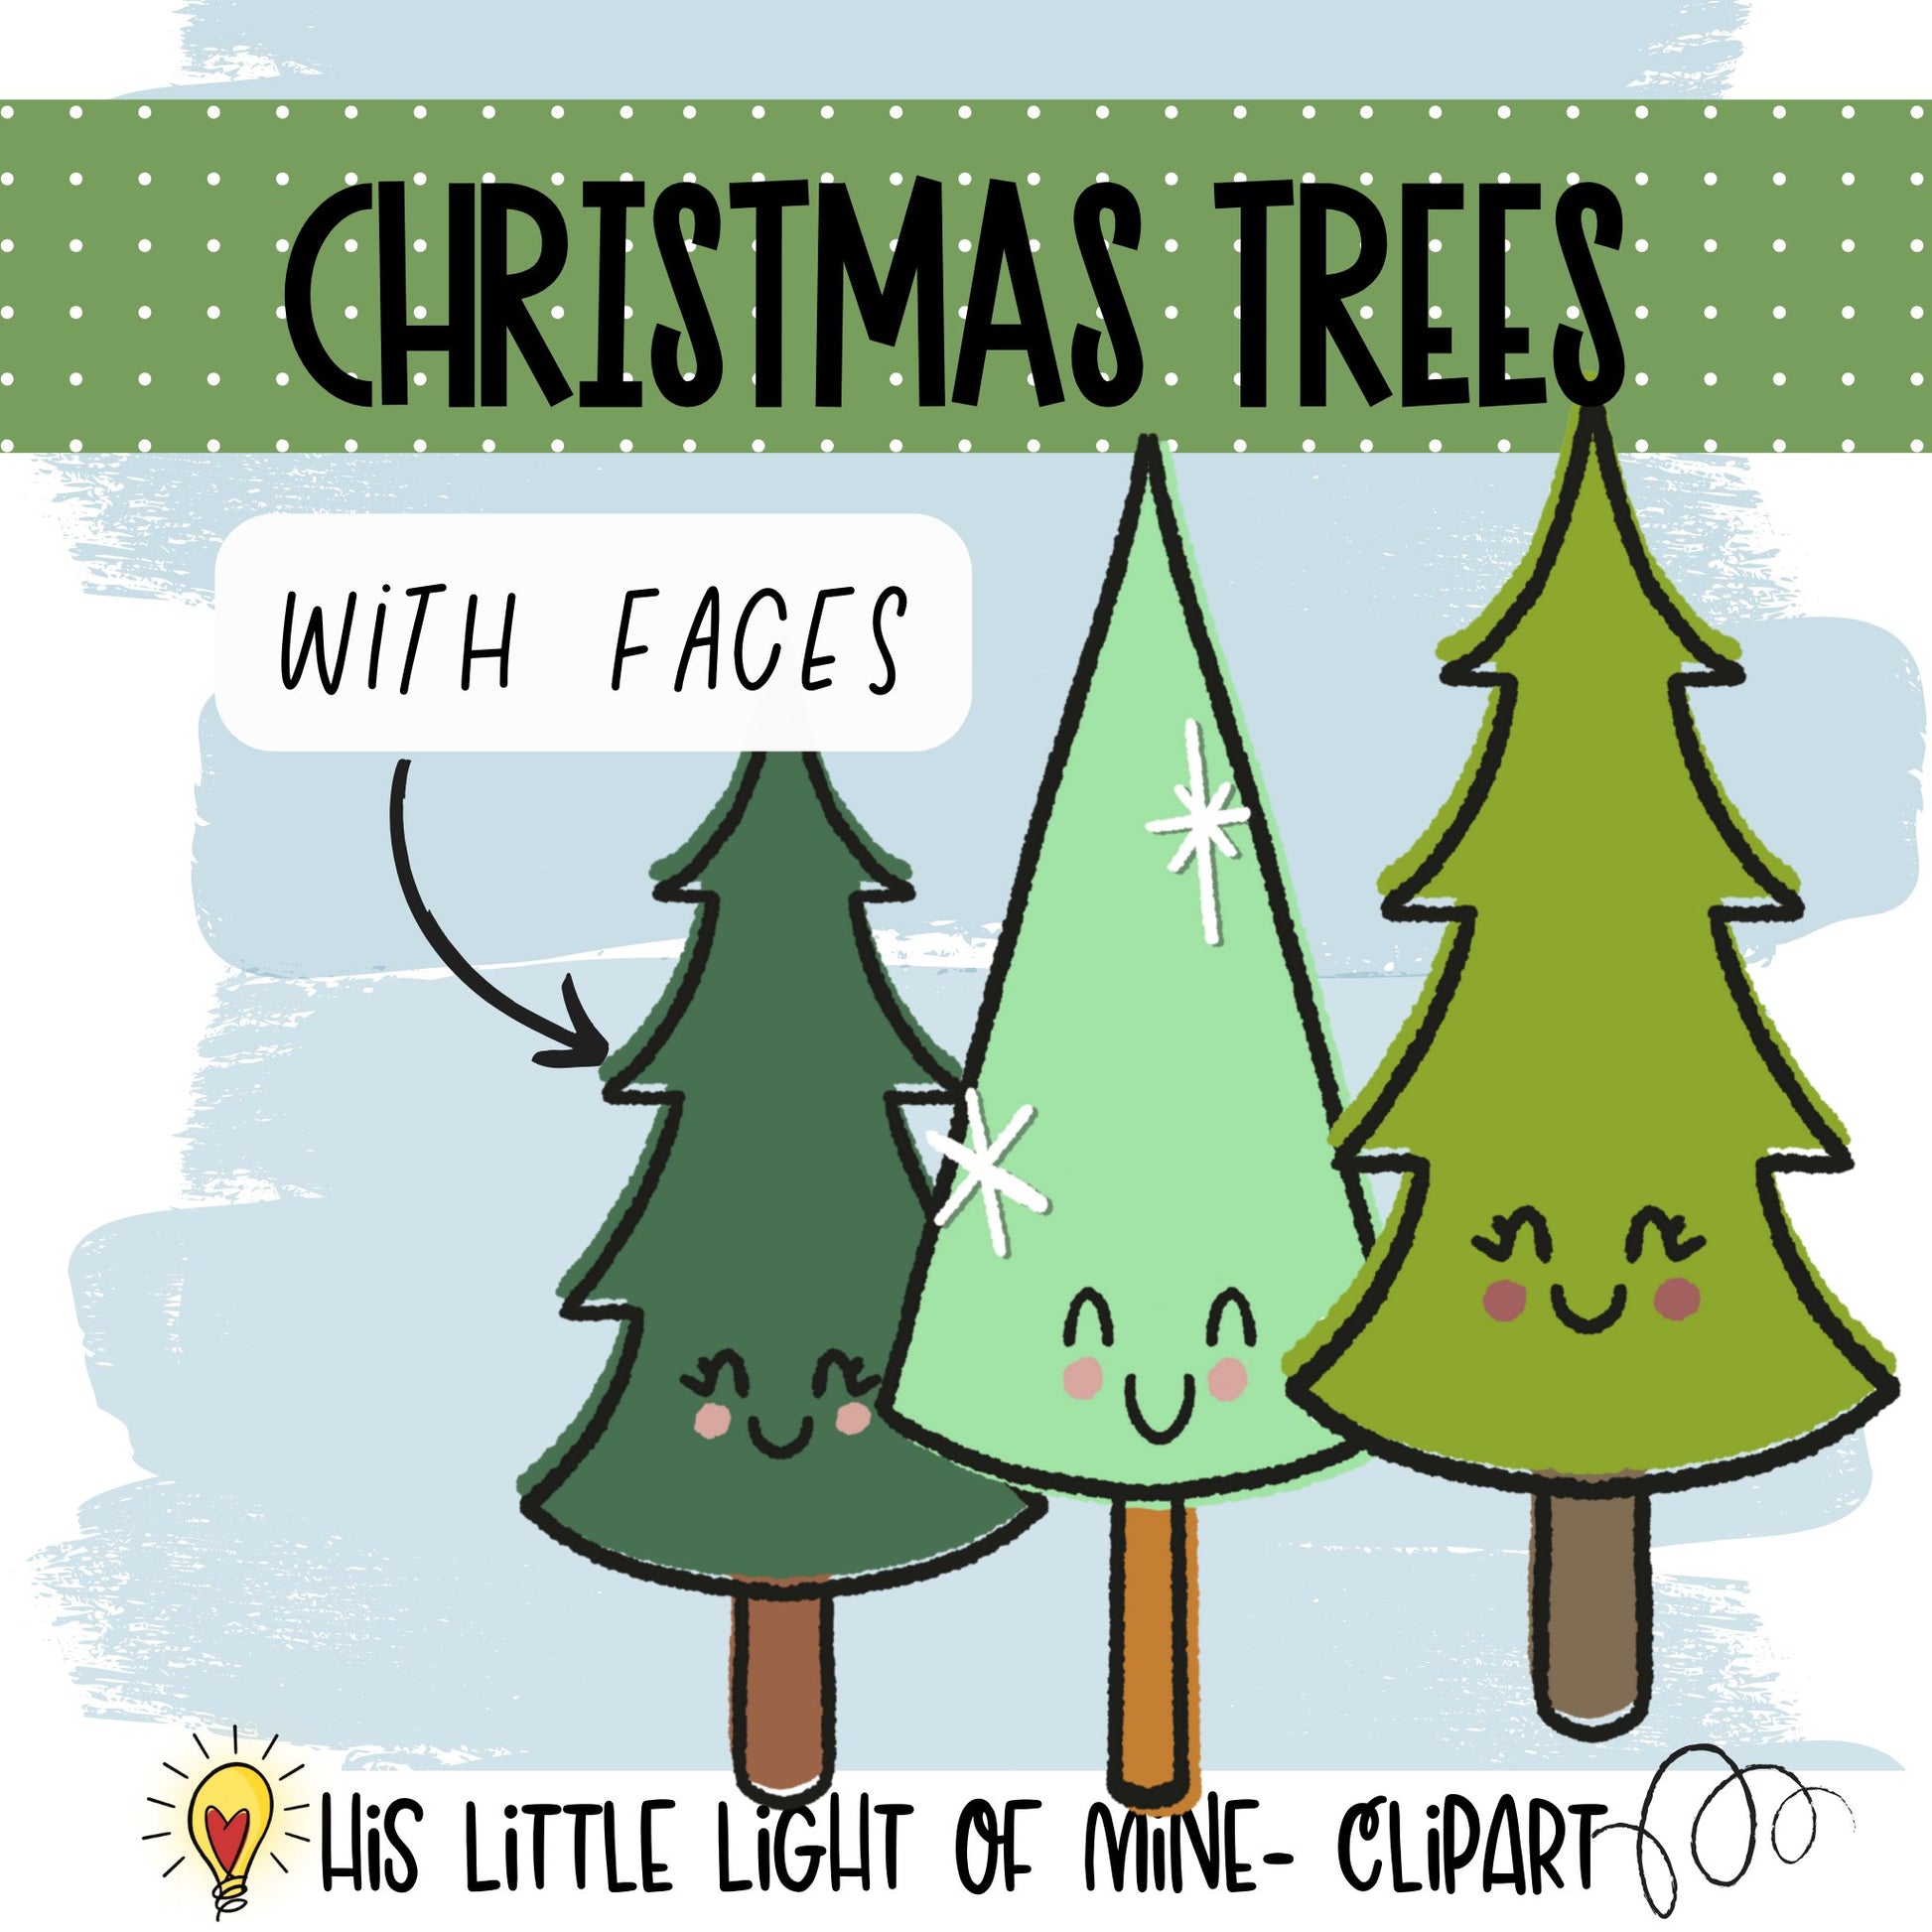 Happy Christmas Trees clip art pack showing Christmas trees with faces in color